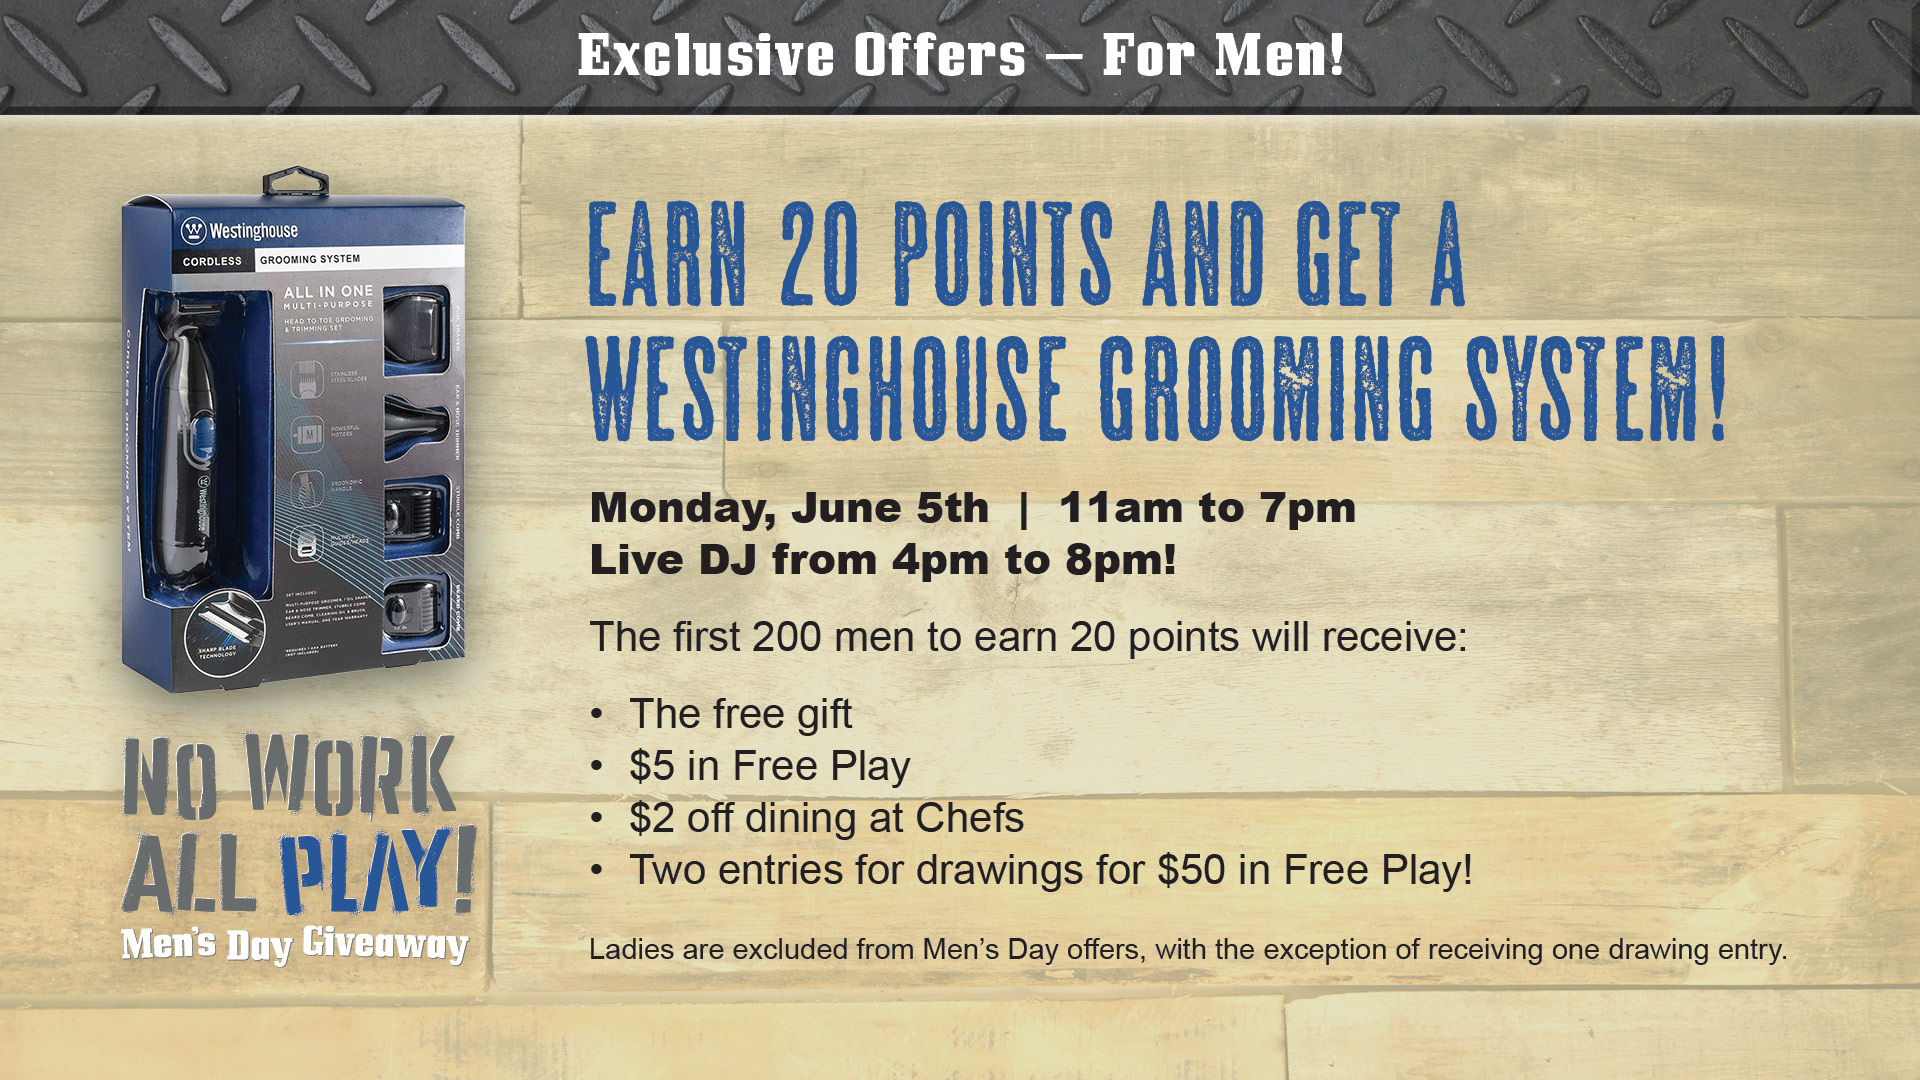 No Work All Play! Men's Day Giveaway - Exclusive Offers for men! Earn 20 points and get a Westinghouse Grooming System! Monday, June 5th. 11am to 7pm. Live DJ from 4pm to 8pm! The first 200 men to earn 20 points will receive: The free gift, $5 in free play, $2 off dining at Chefs, two entries for drawings for $50 in free play! Ladies are excluded from Men's Day offers, with the exception of receiving one drawing entry.